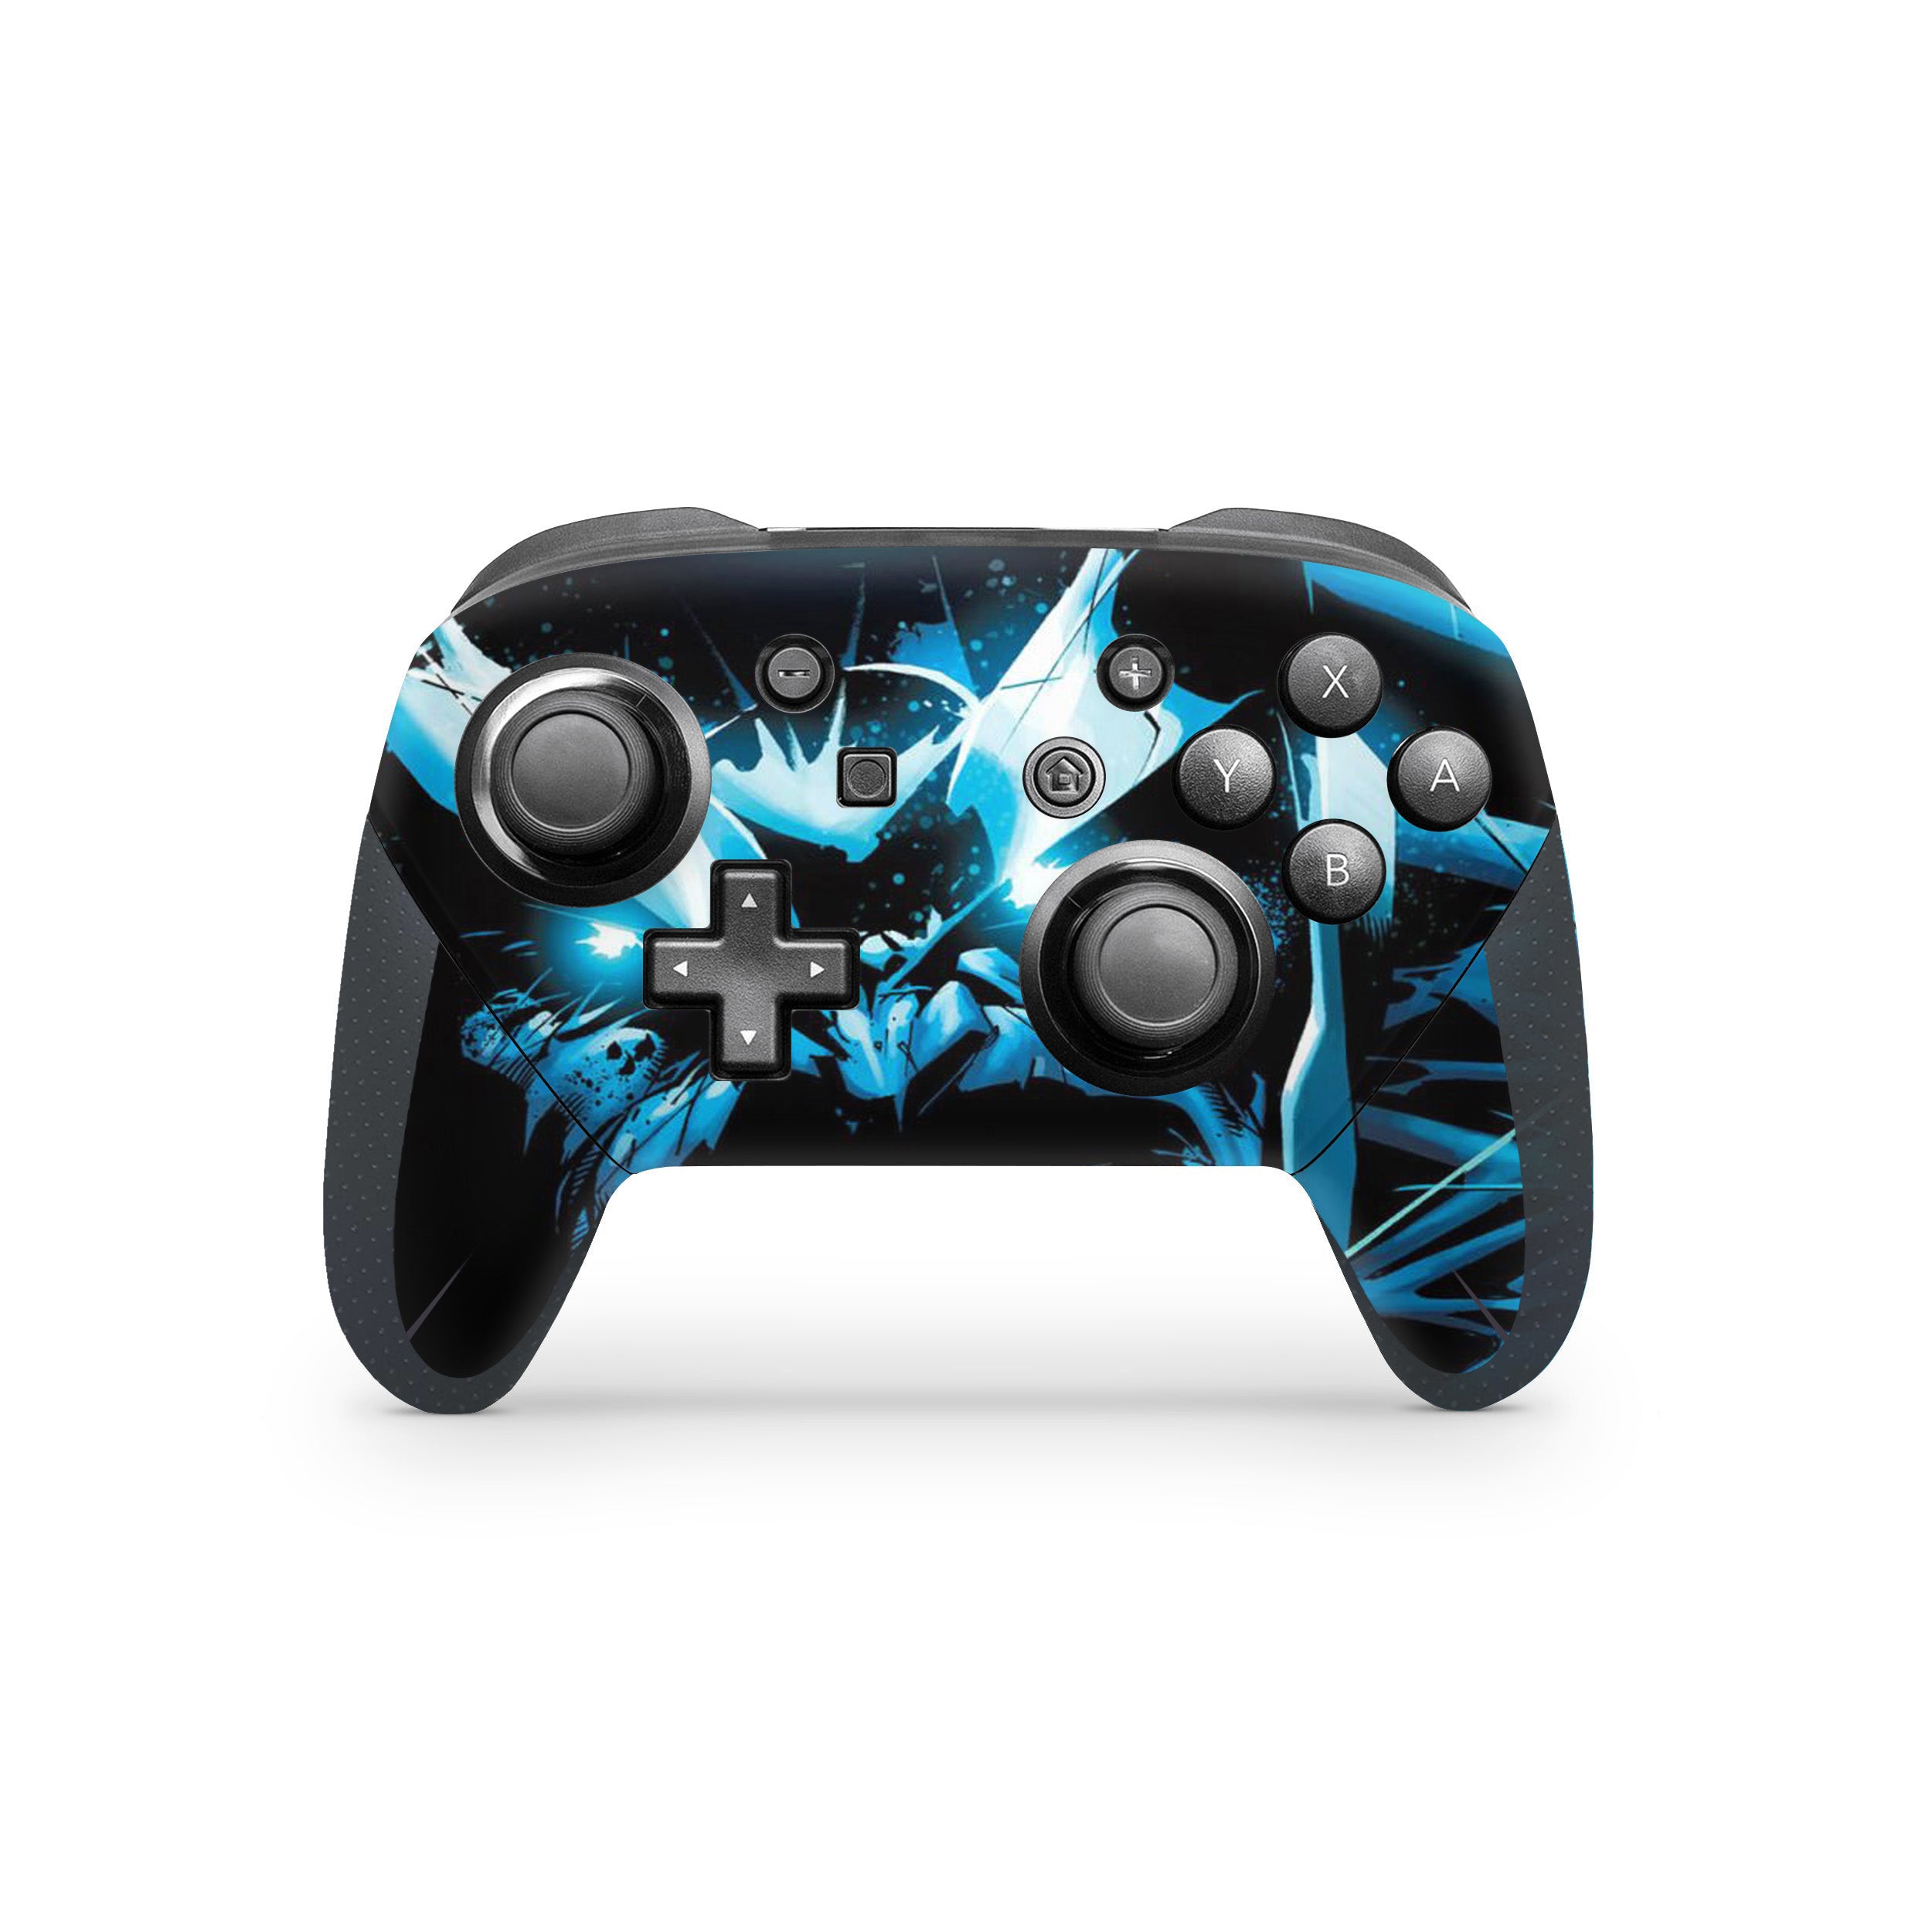 A video game skin featuring a Marvel Thanos design for the Switch Pro Controller.